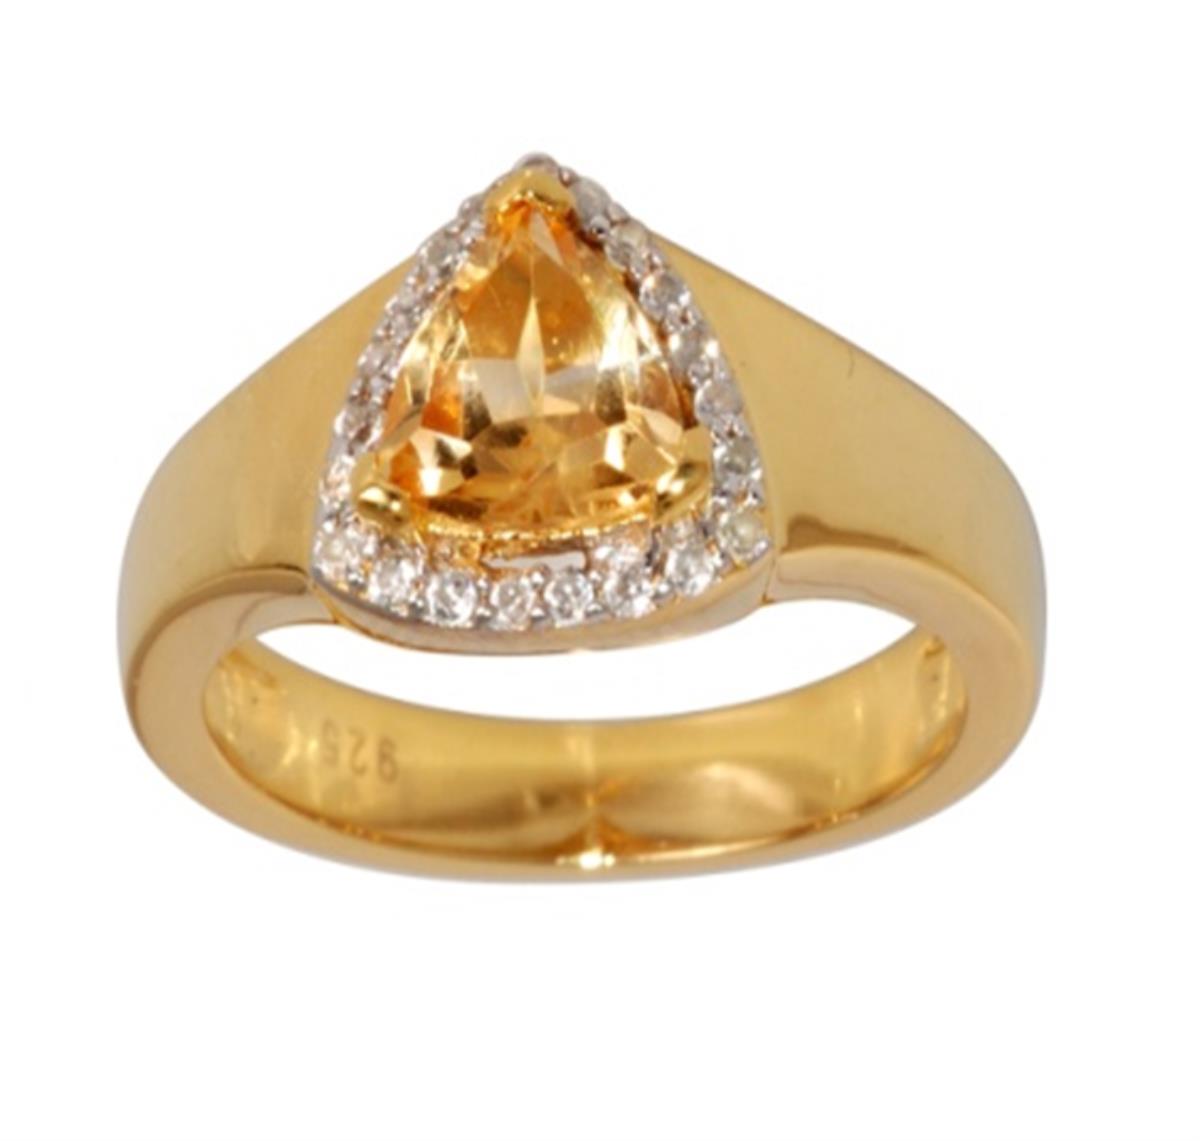 Sterling Silver Yellow 1-Micron 7mm Trillion Cut Citrine with White Zircon Halo Fashion Ring